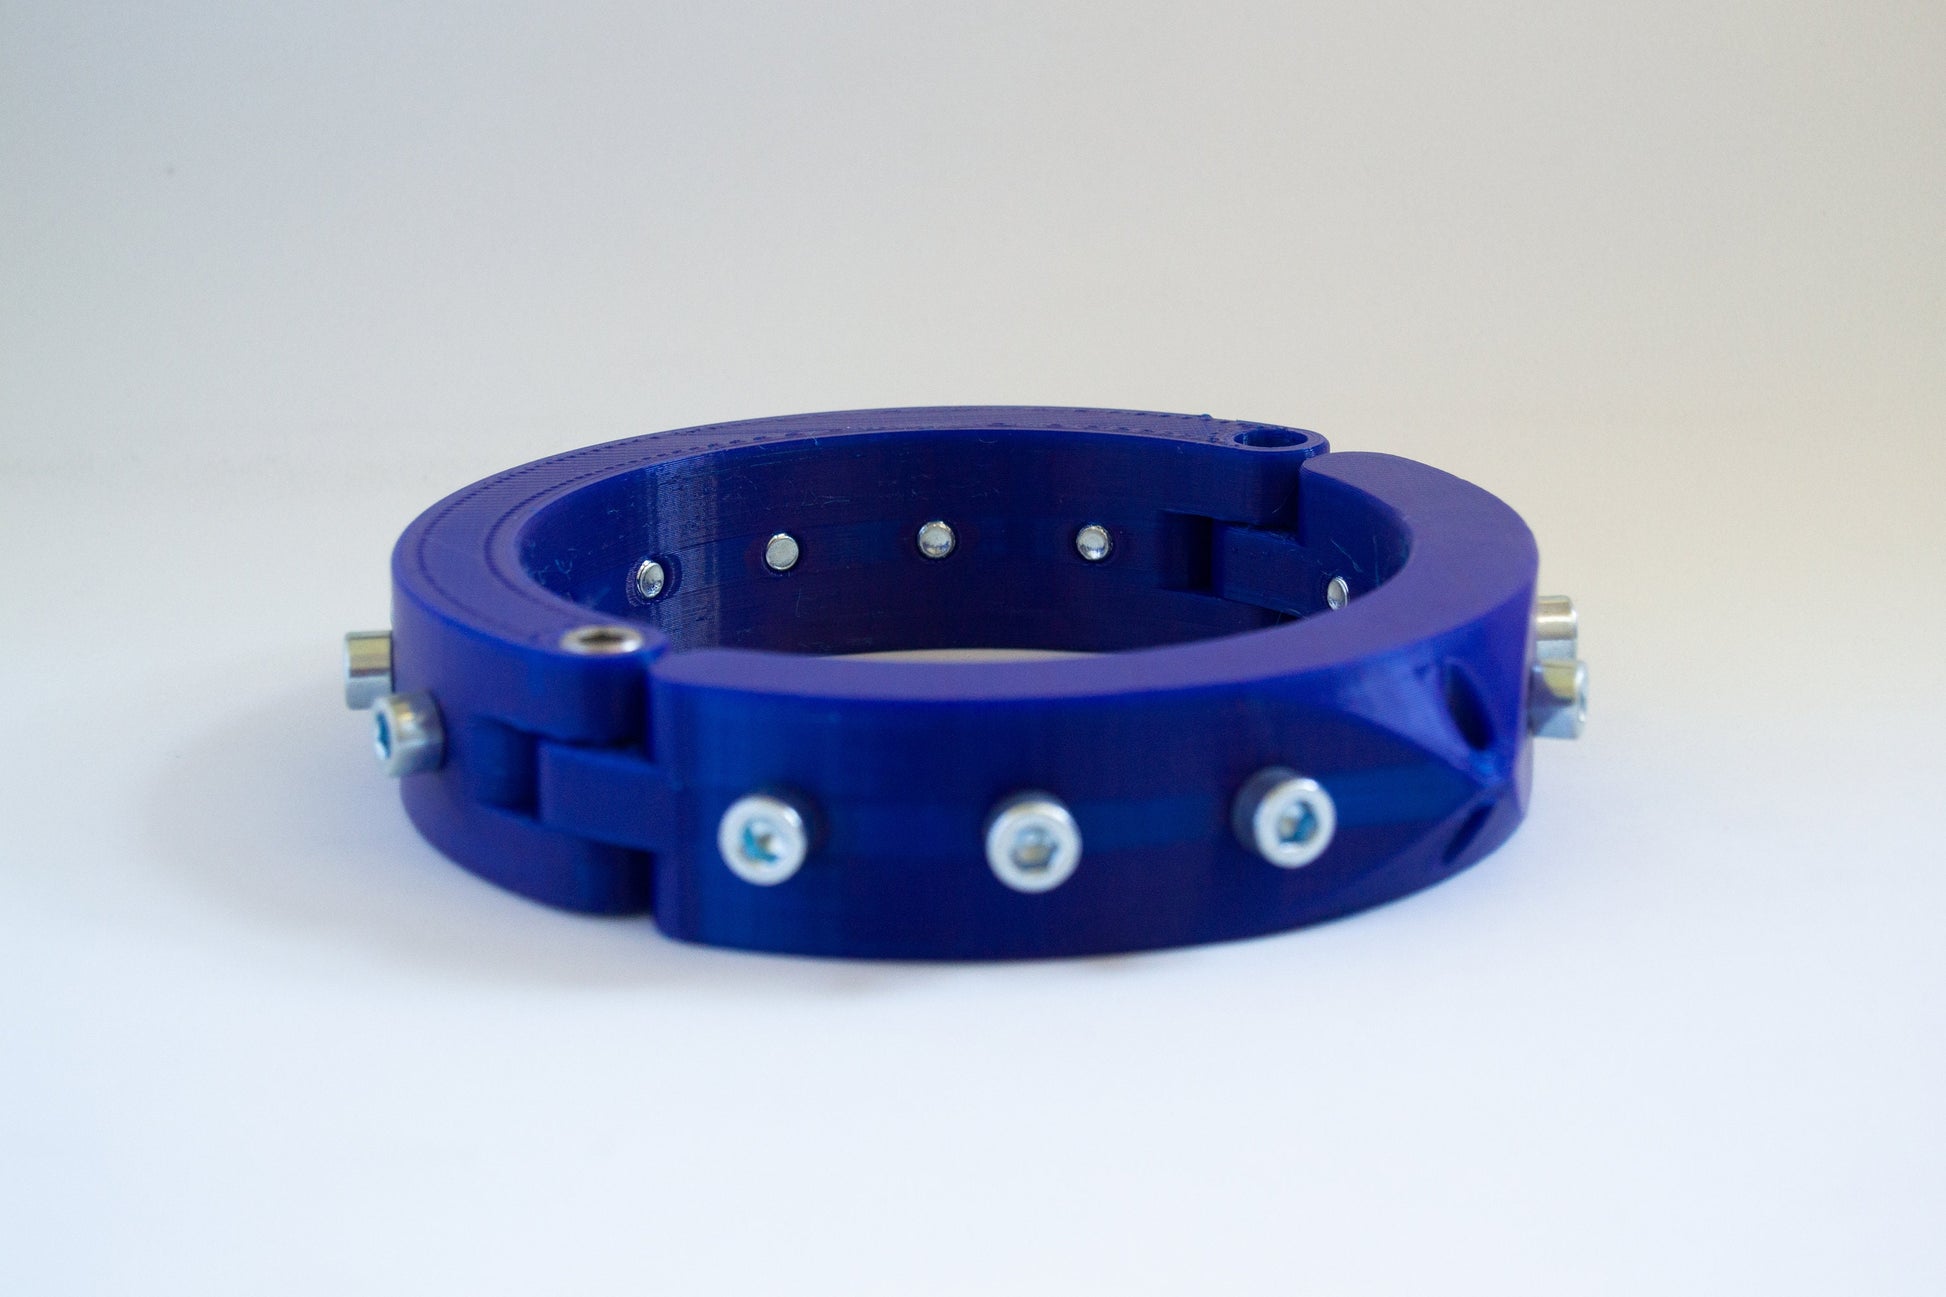 Blue 3d printed bdsm collar adorned with bolts from the side